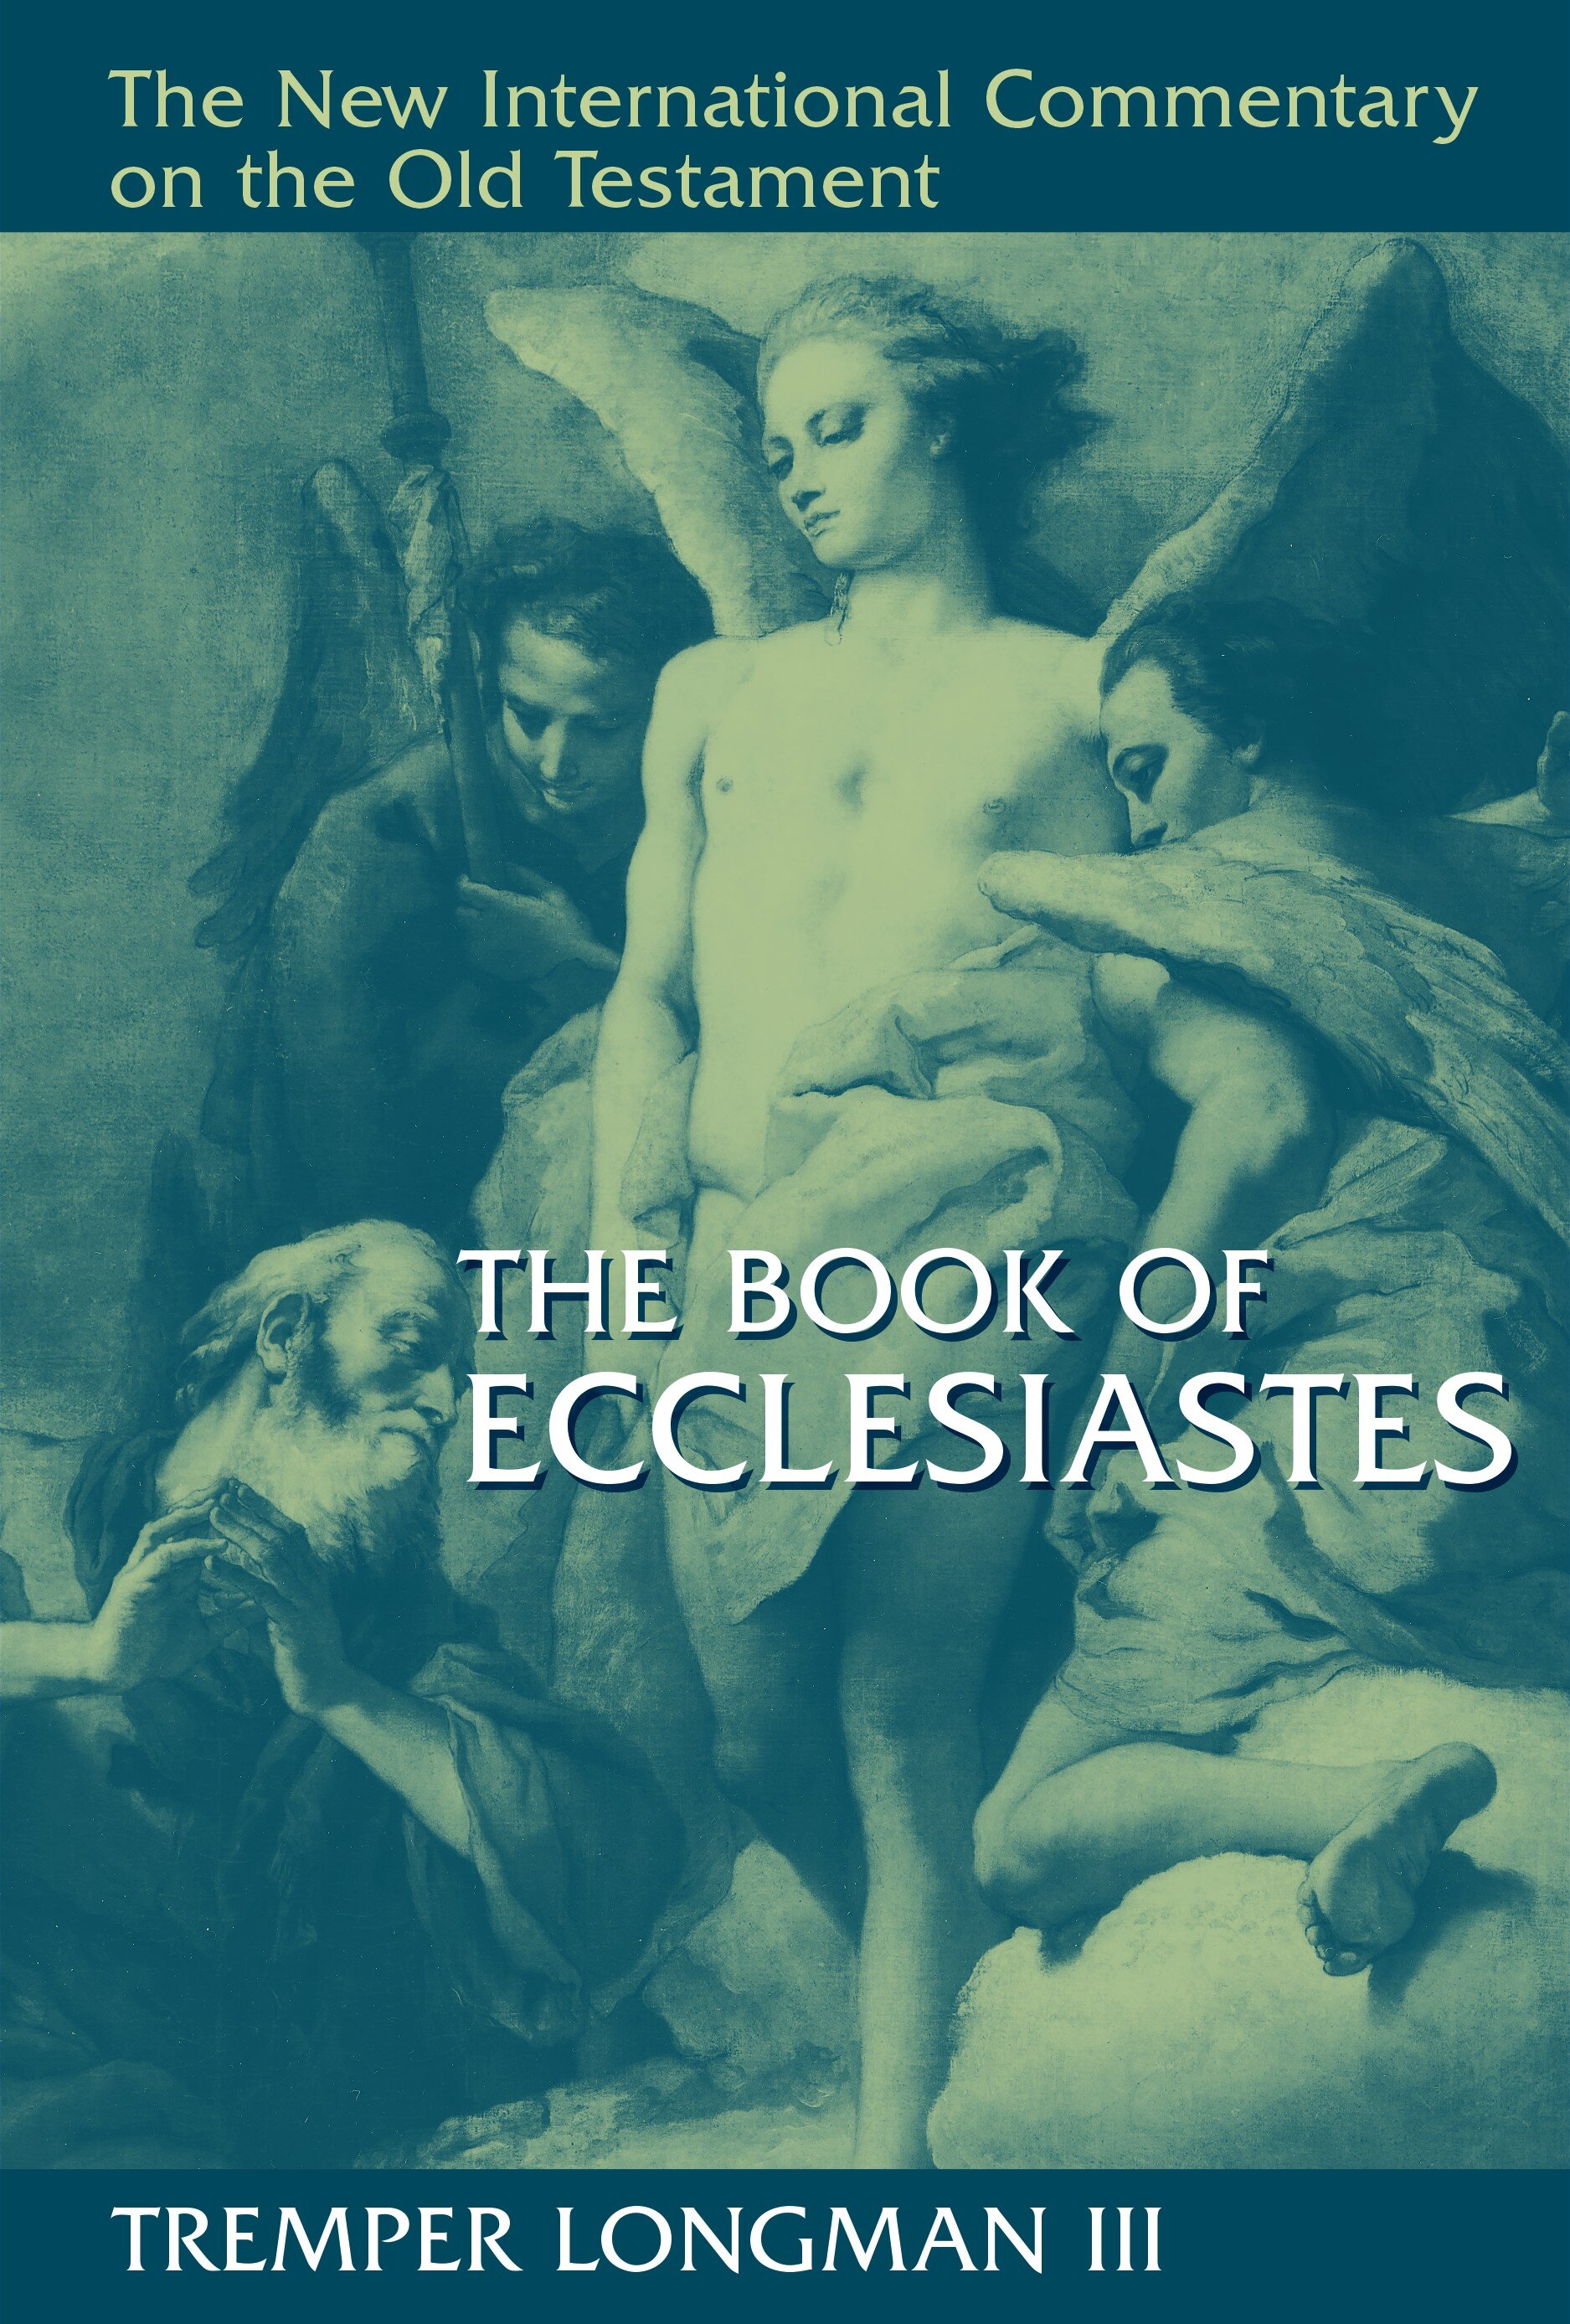 The Book of Ecclesiastes (The New International Commentary on the Old Testament | NICOT)